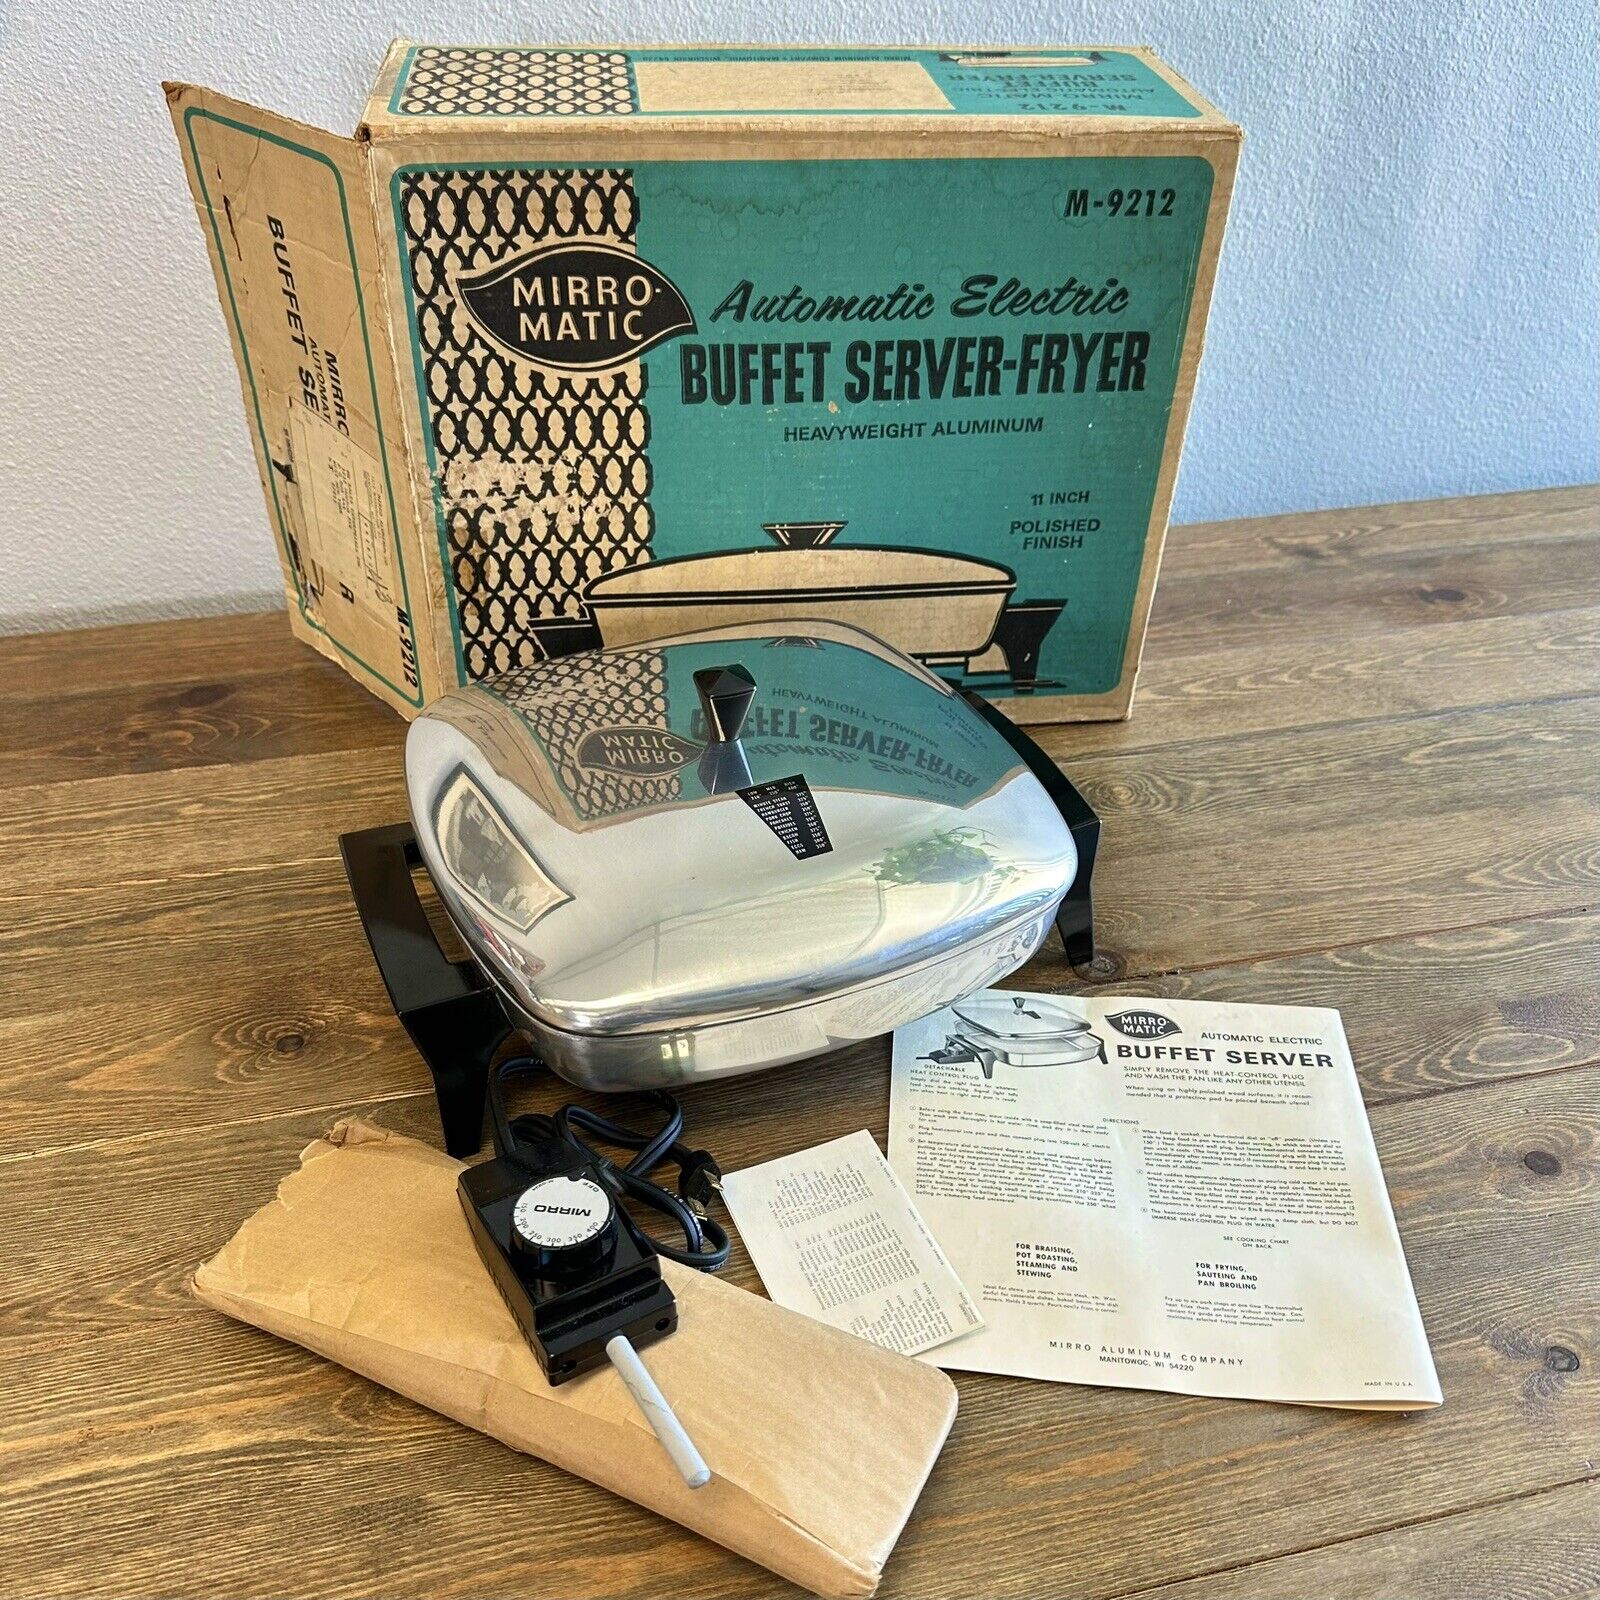 Vintage MIRRO-MATIC Automatic Electric Buffet Server Fryer in Box New 1960s NOS